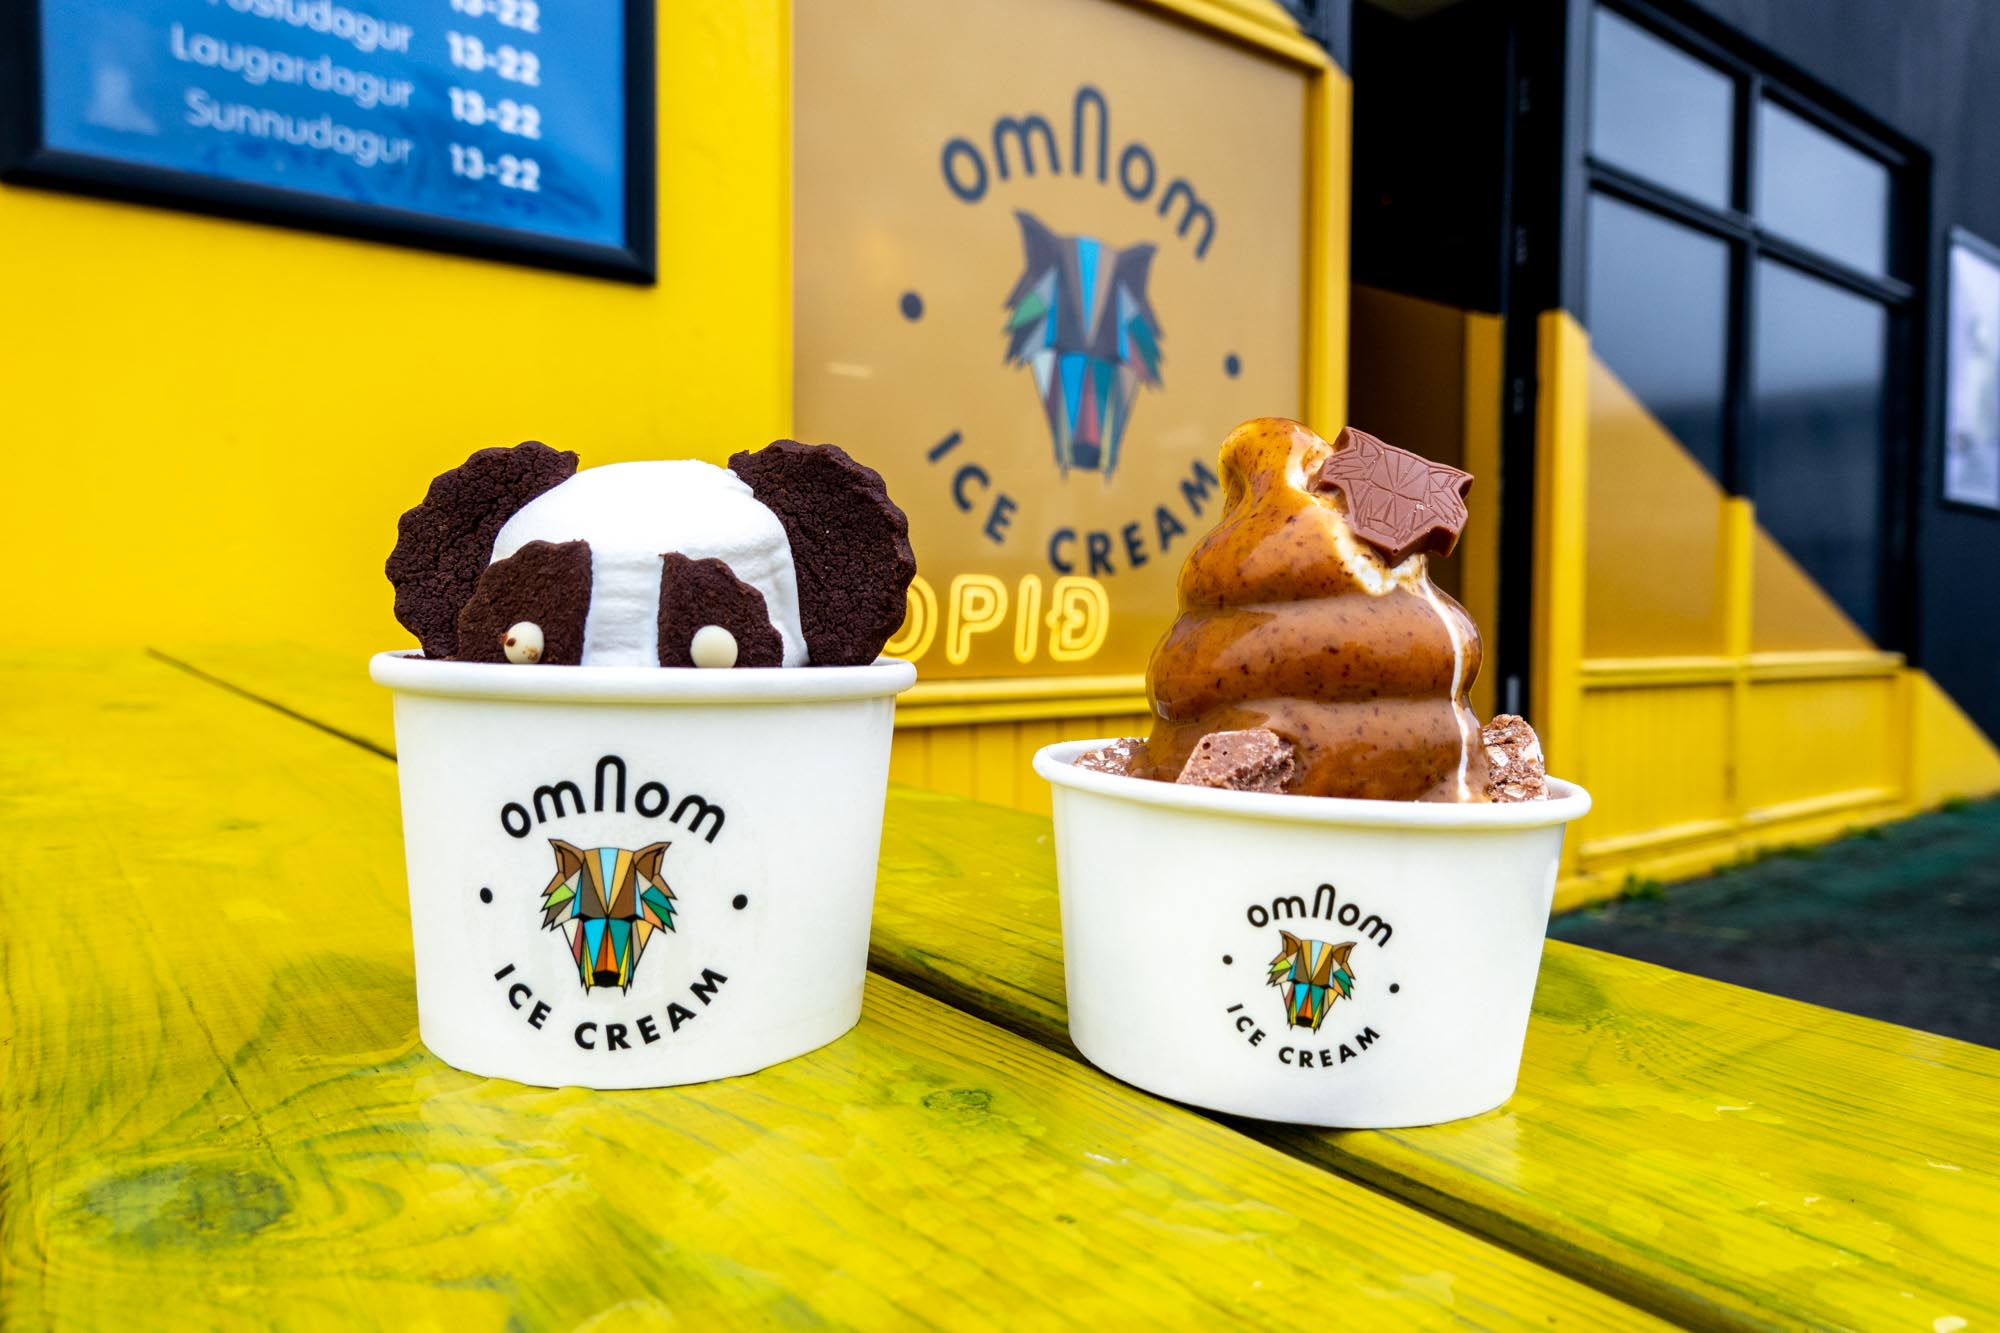 Ice cream in cups on a yellow picnic table in front of a sign for Omnom ice cream.